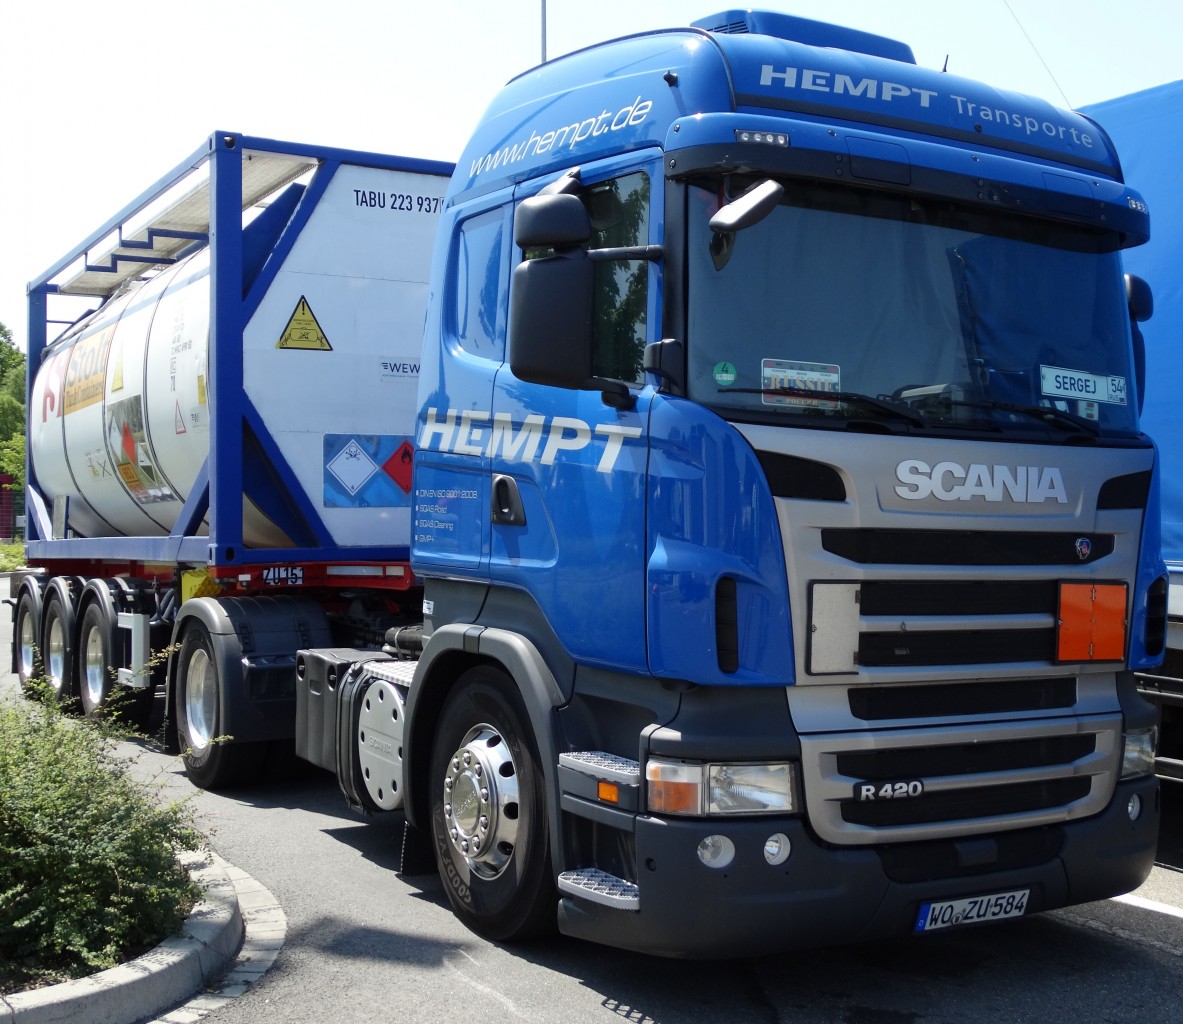 Scania Tankcontainer am 11.07.15 in Ludwigshafen 